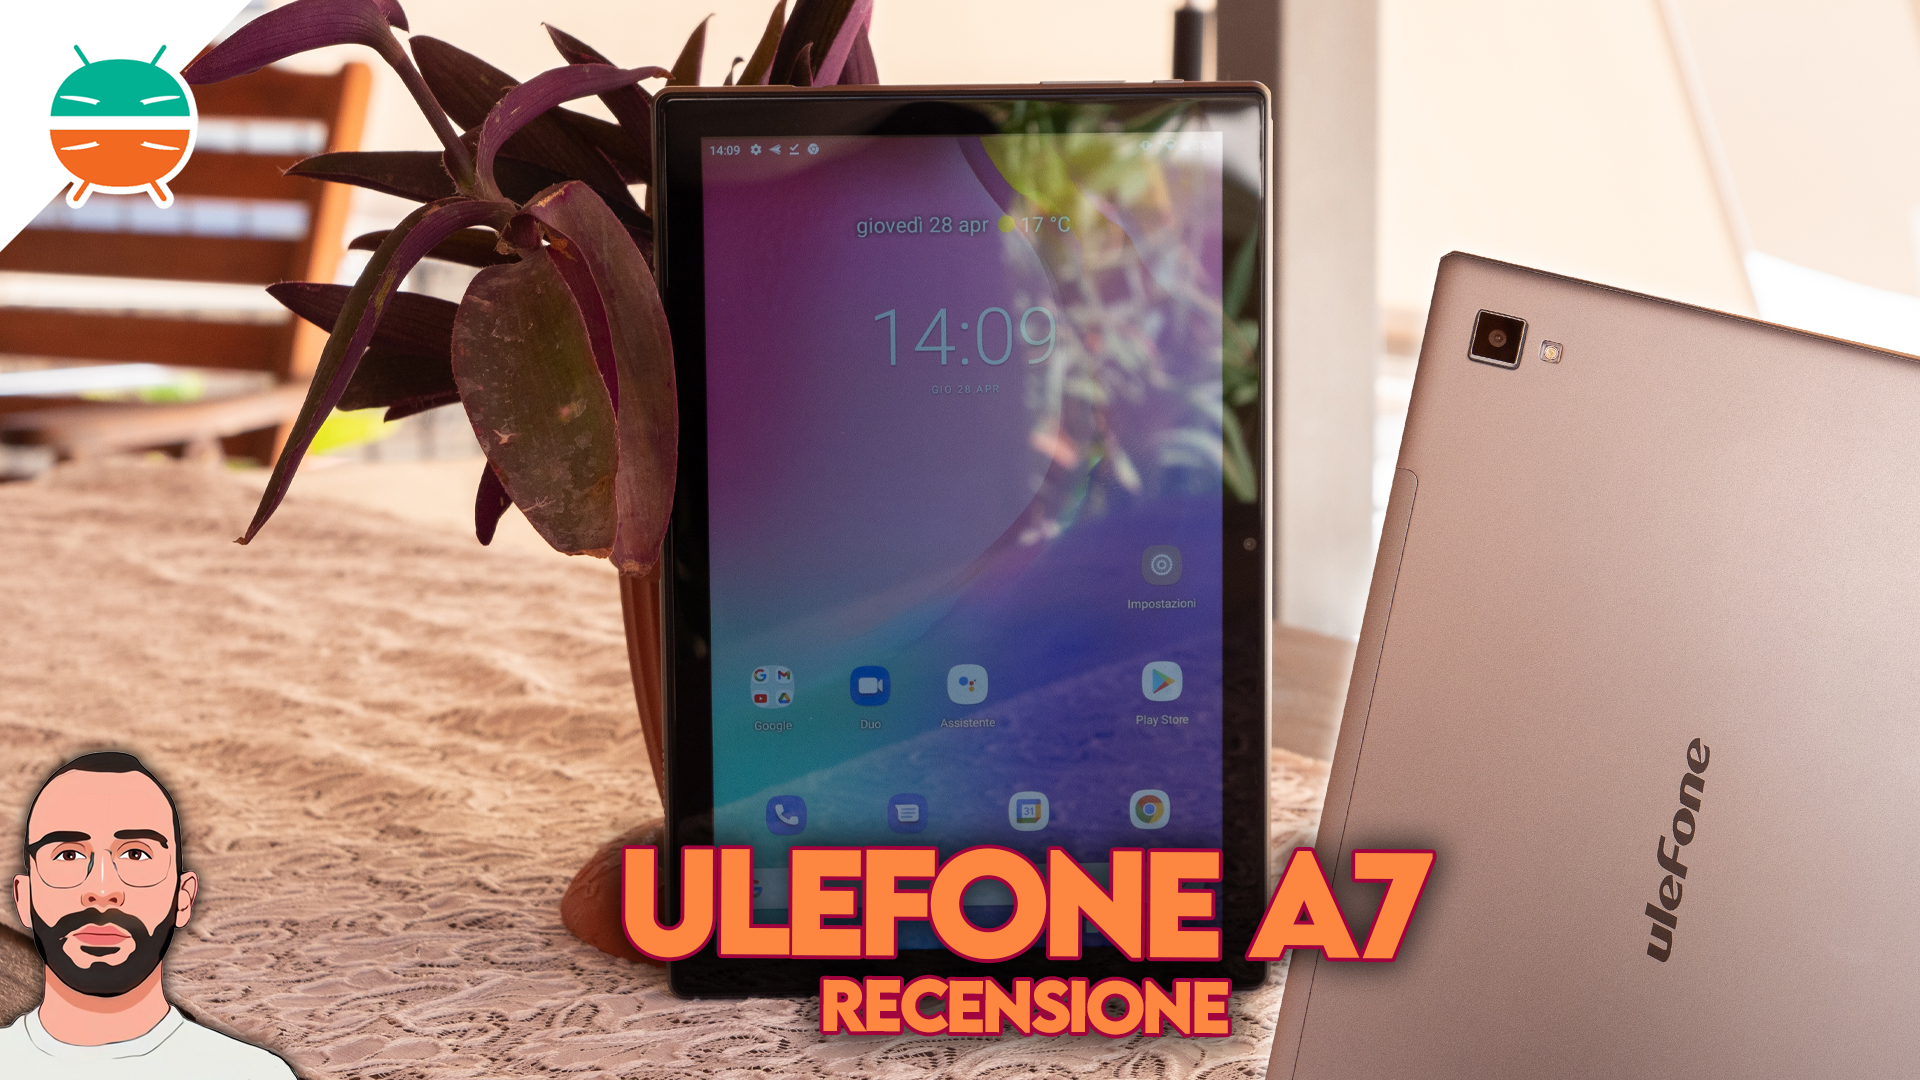 Ulefone A7 review: specifications, performance and price - GizChina.it